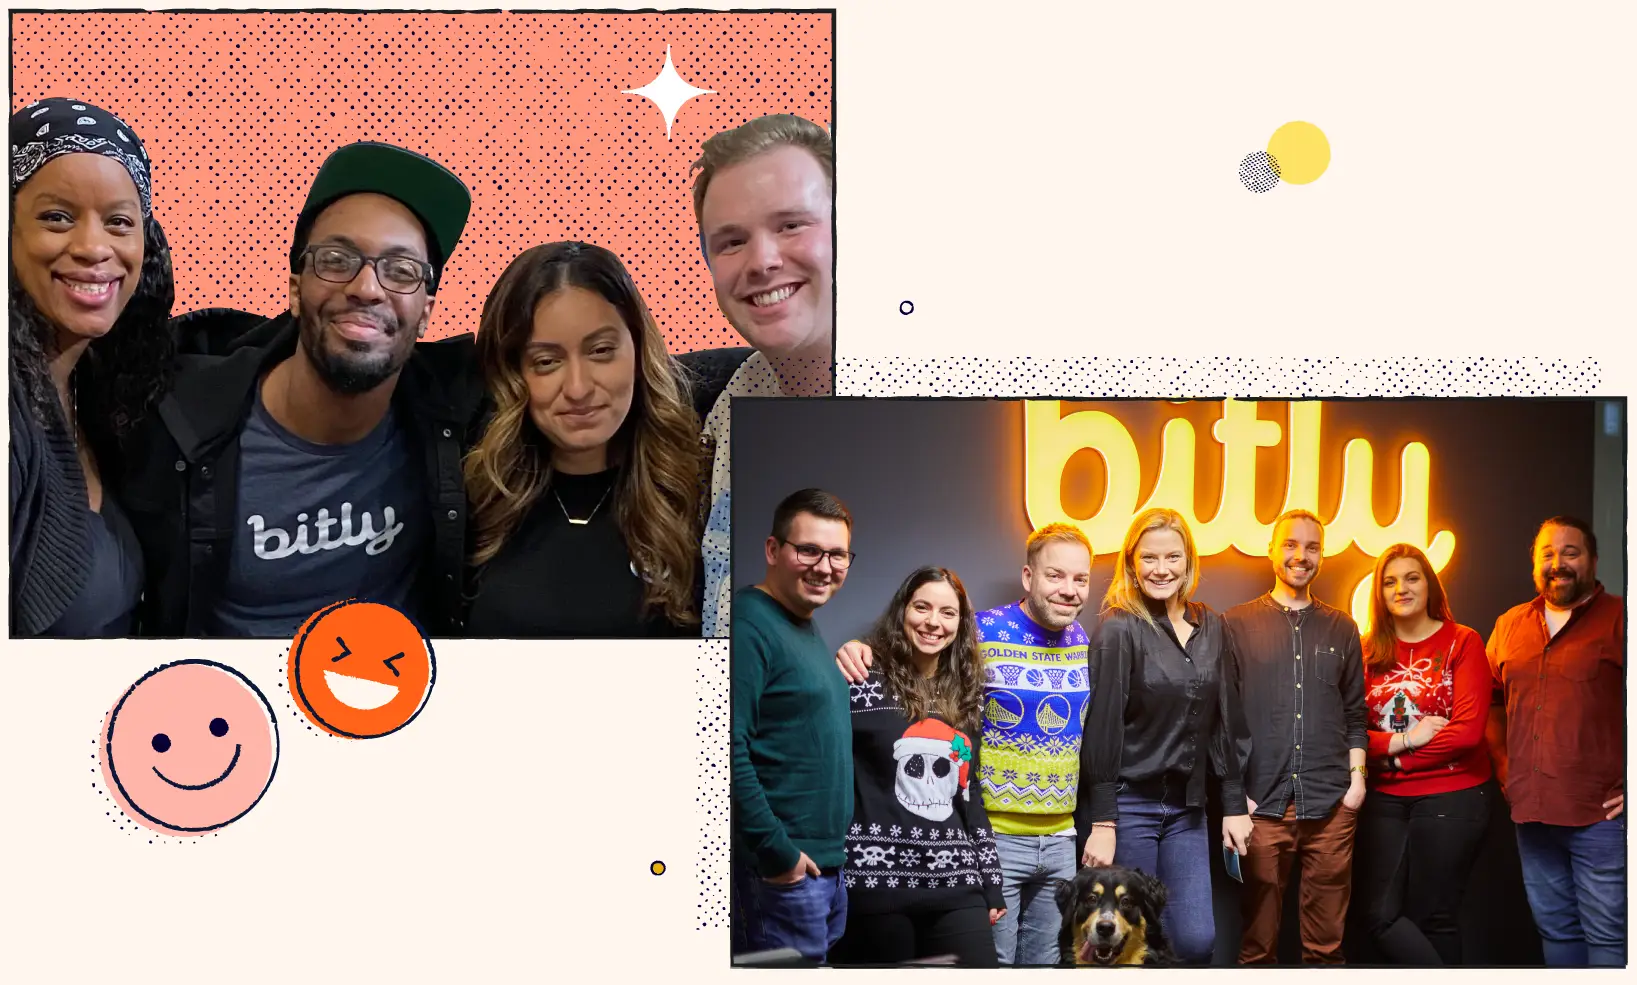 A collage of two photos featuring two groups of Bitly employees smiling in photos.